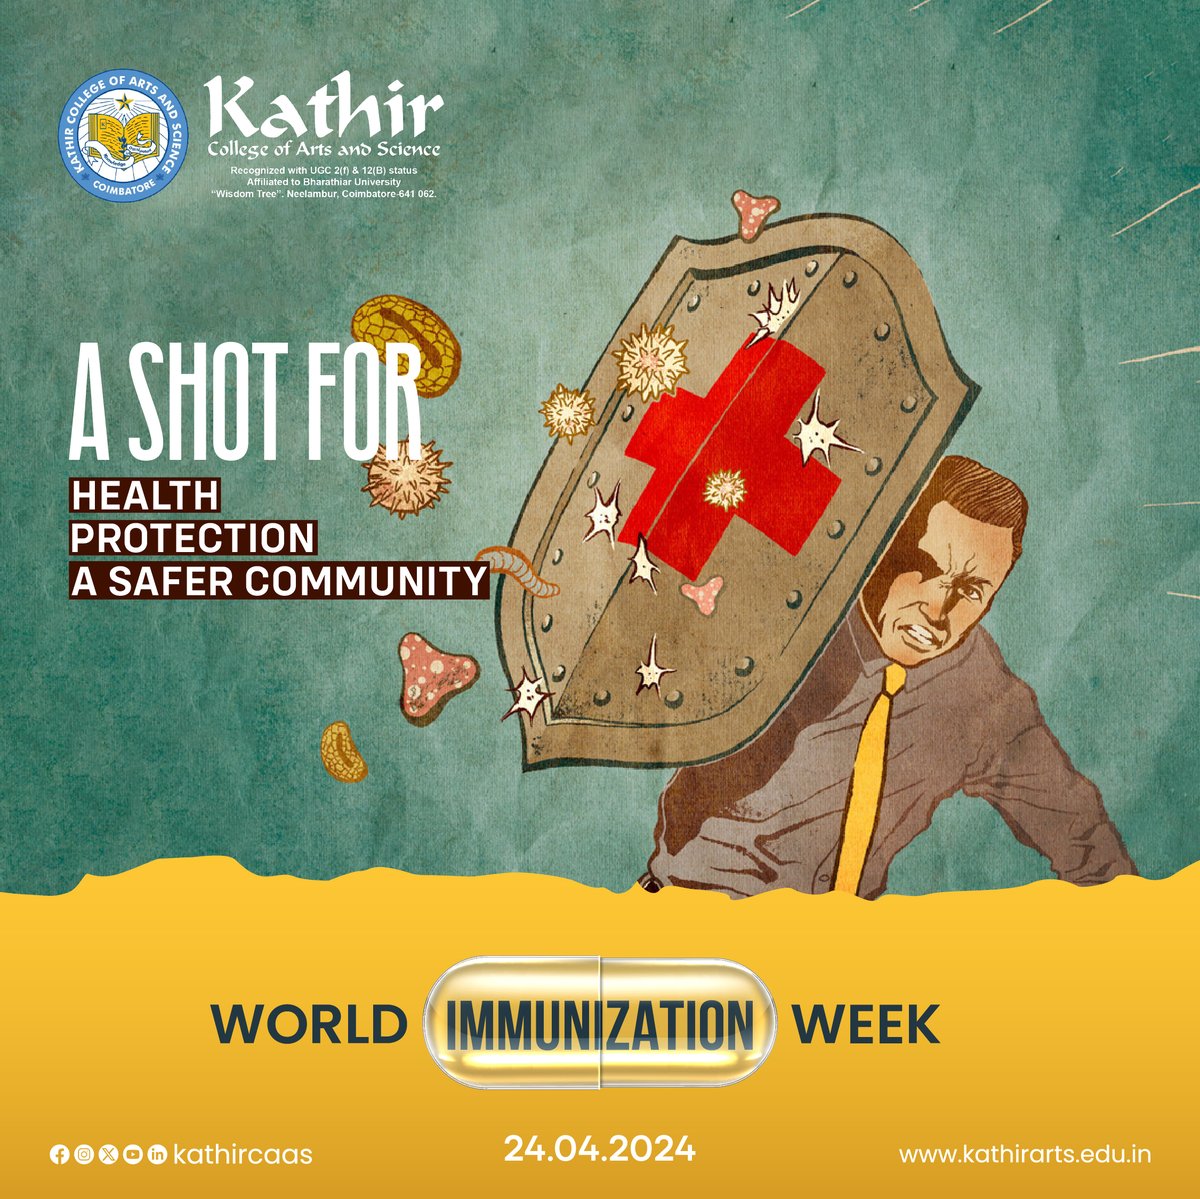 Protecting our future, one shot at a time! Happy World Immunization Week! Let's celebrate the life-saving power of vaccines and work together to ensure everyone has access to immunization.

#kathircaas #Healthylife #WorldImmunizationWeek2024 #immunitychallenge #HealthProtection